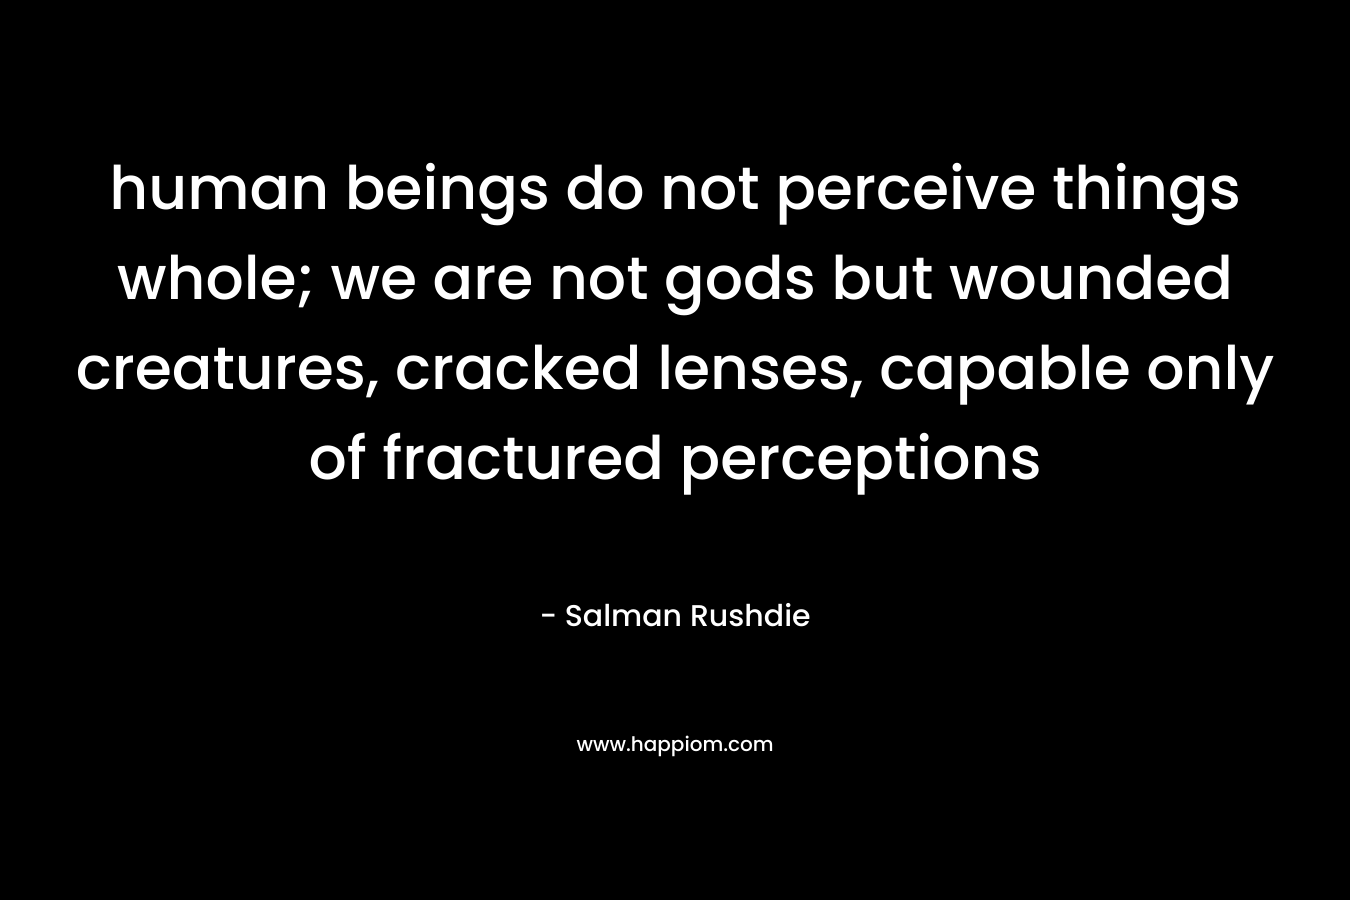 human beings do not perceive things whole; we are not gods but wounded creatures, cracked lenses, capable only of fractured perceptions – Salman Rushdie